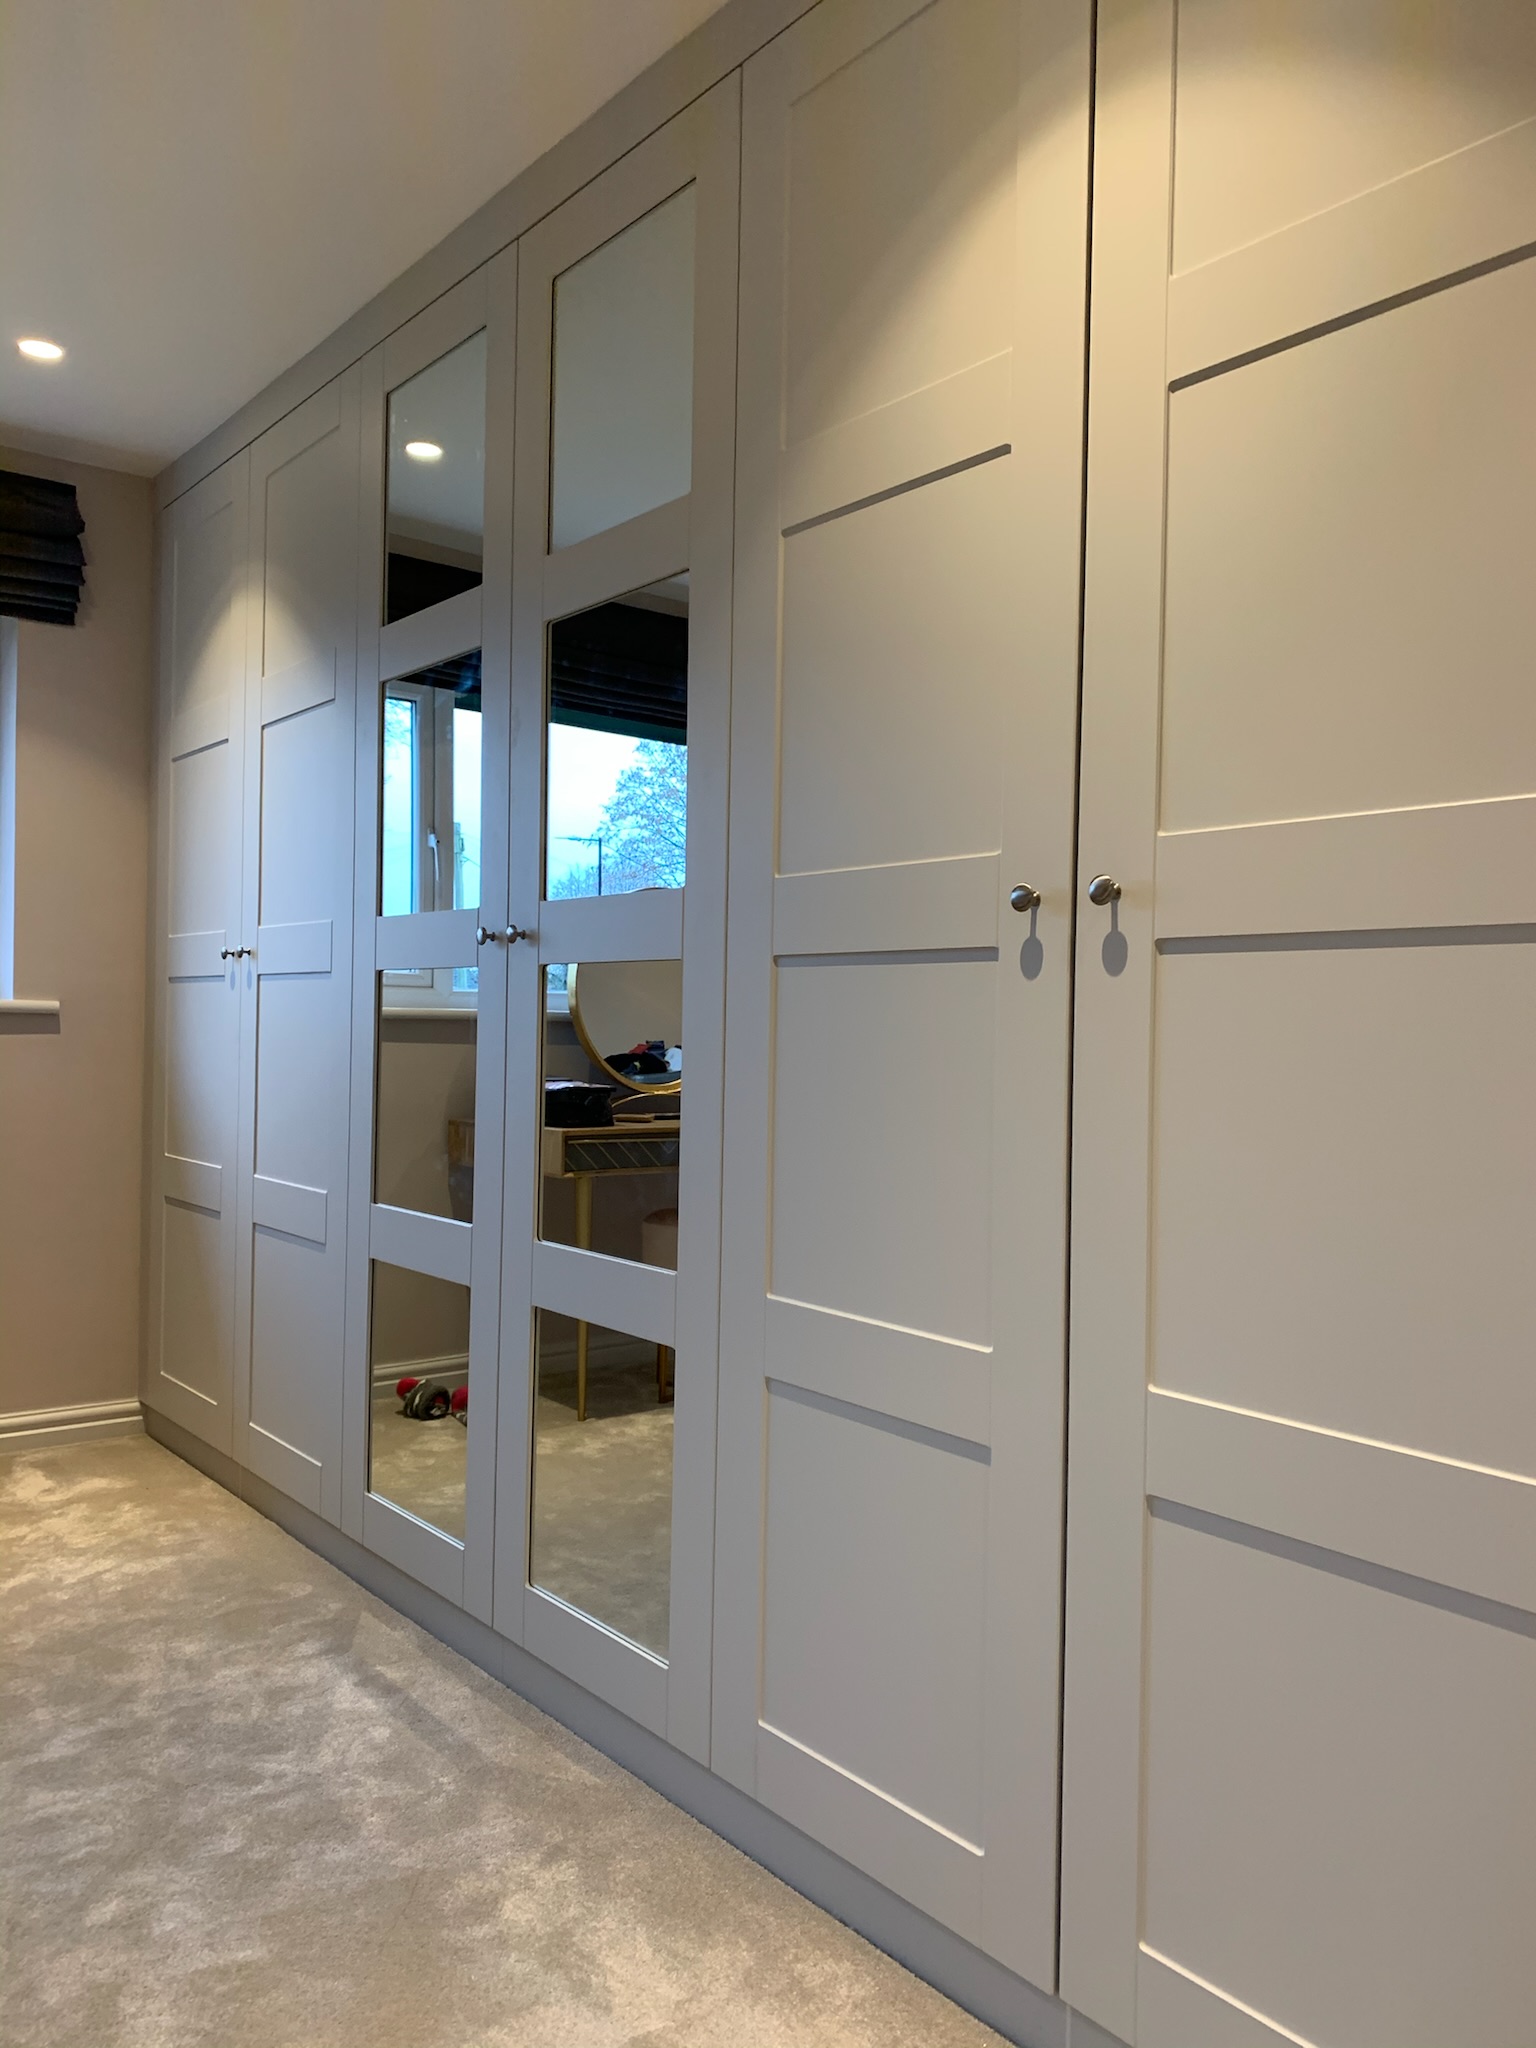 Contemporary wardrobes with long mirrors in Hale Barns home